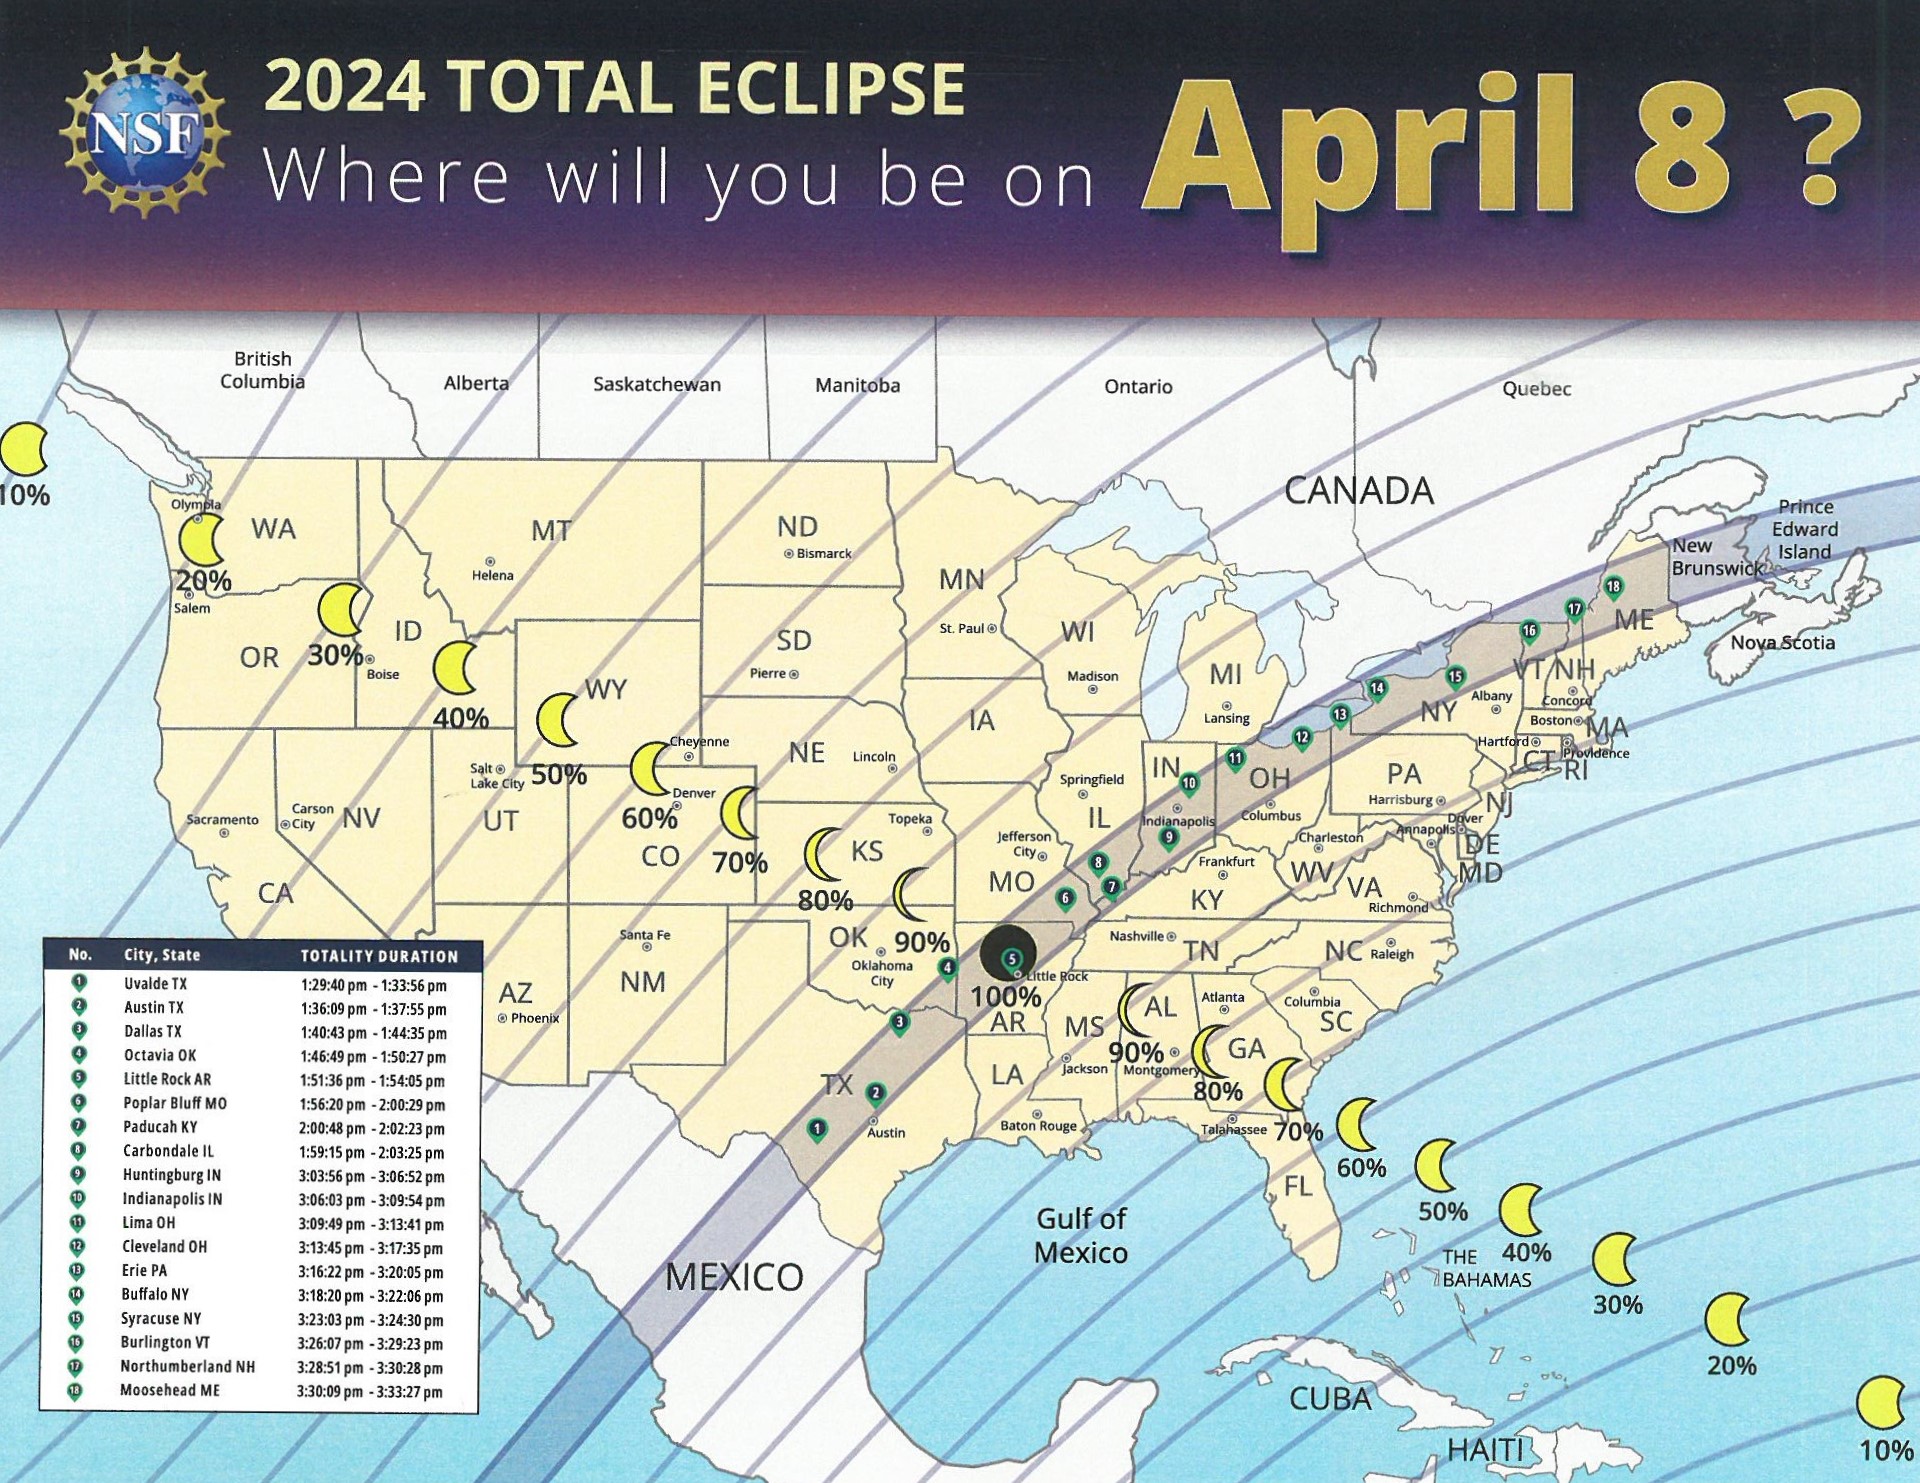 Map of Totality for 2024 Solar Eclipse Where will you be on April 8th?